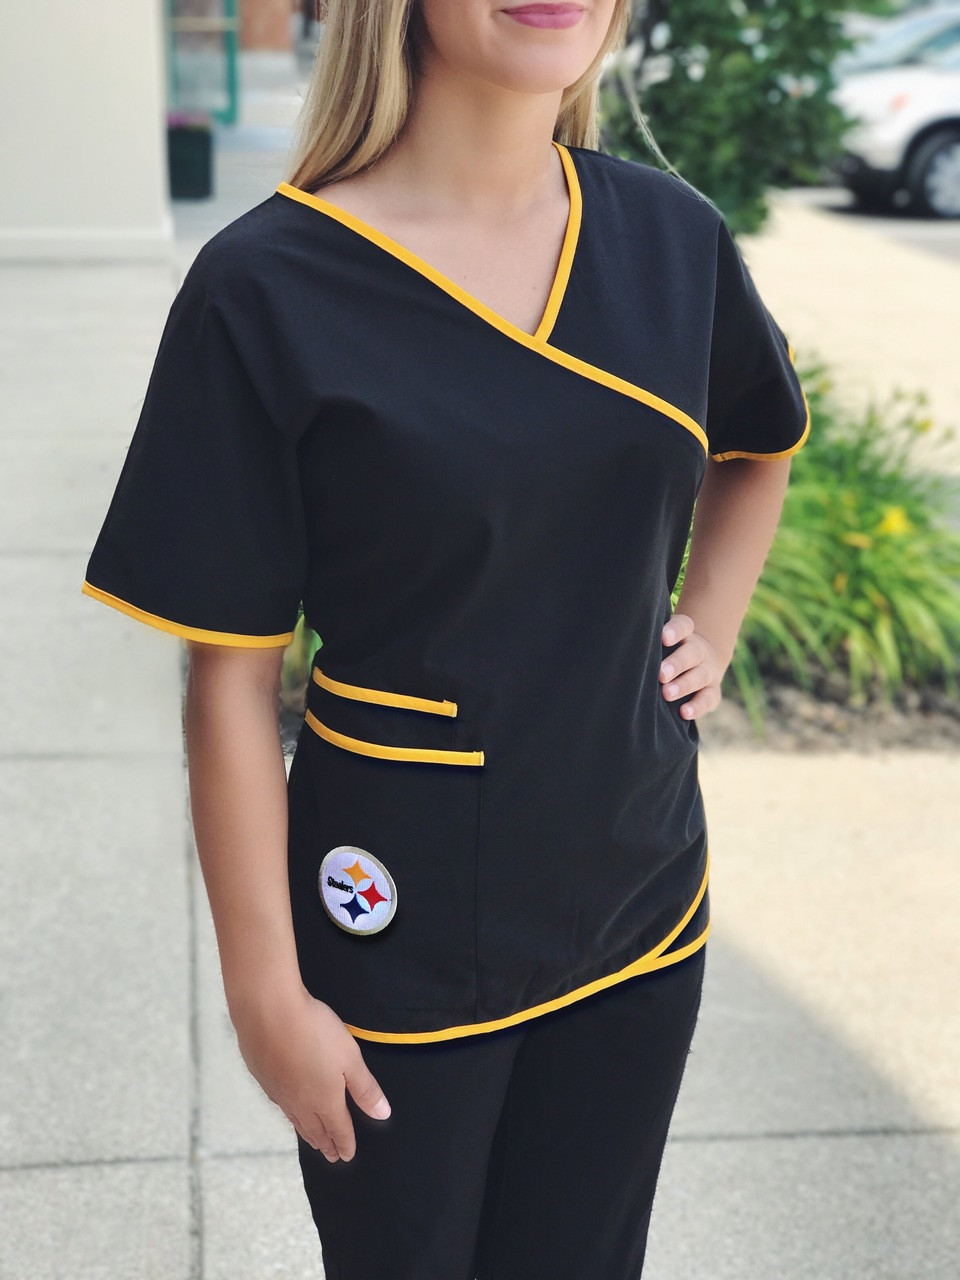 NFL Team Apparel Women's Pittsburgh Steelers Top Size Medium :  r/gym_apparel_for_women